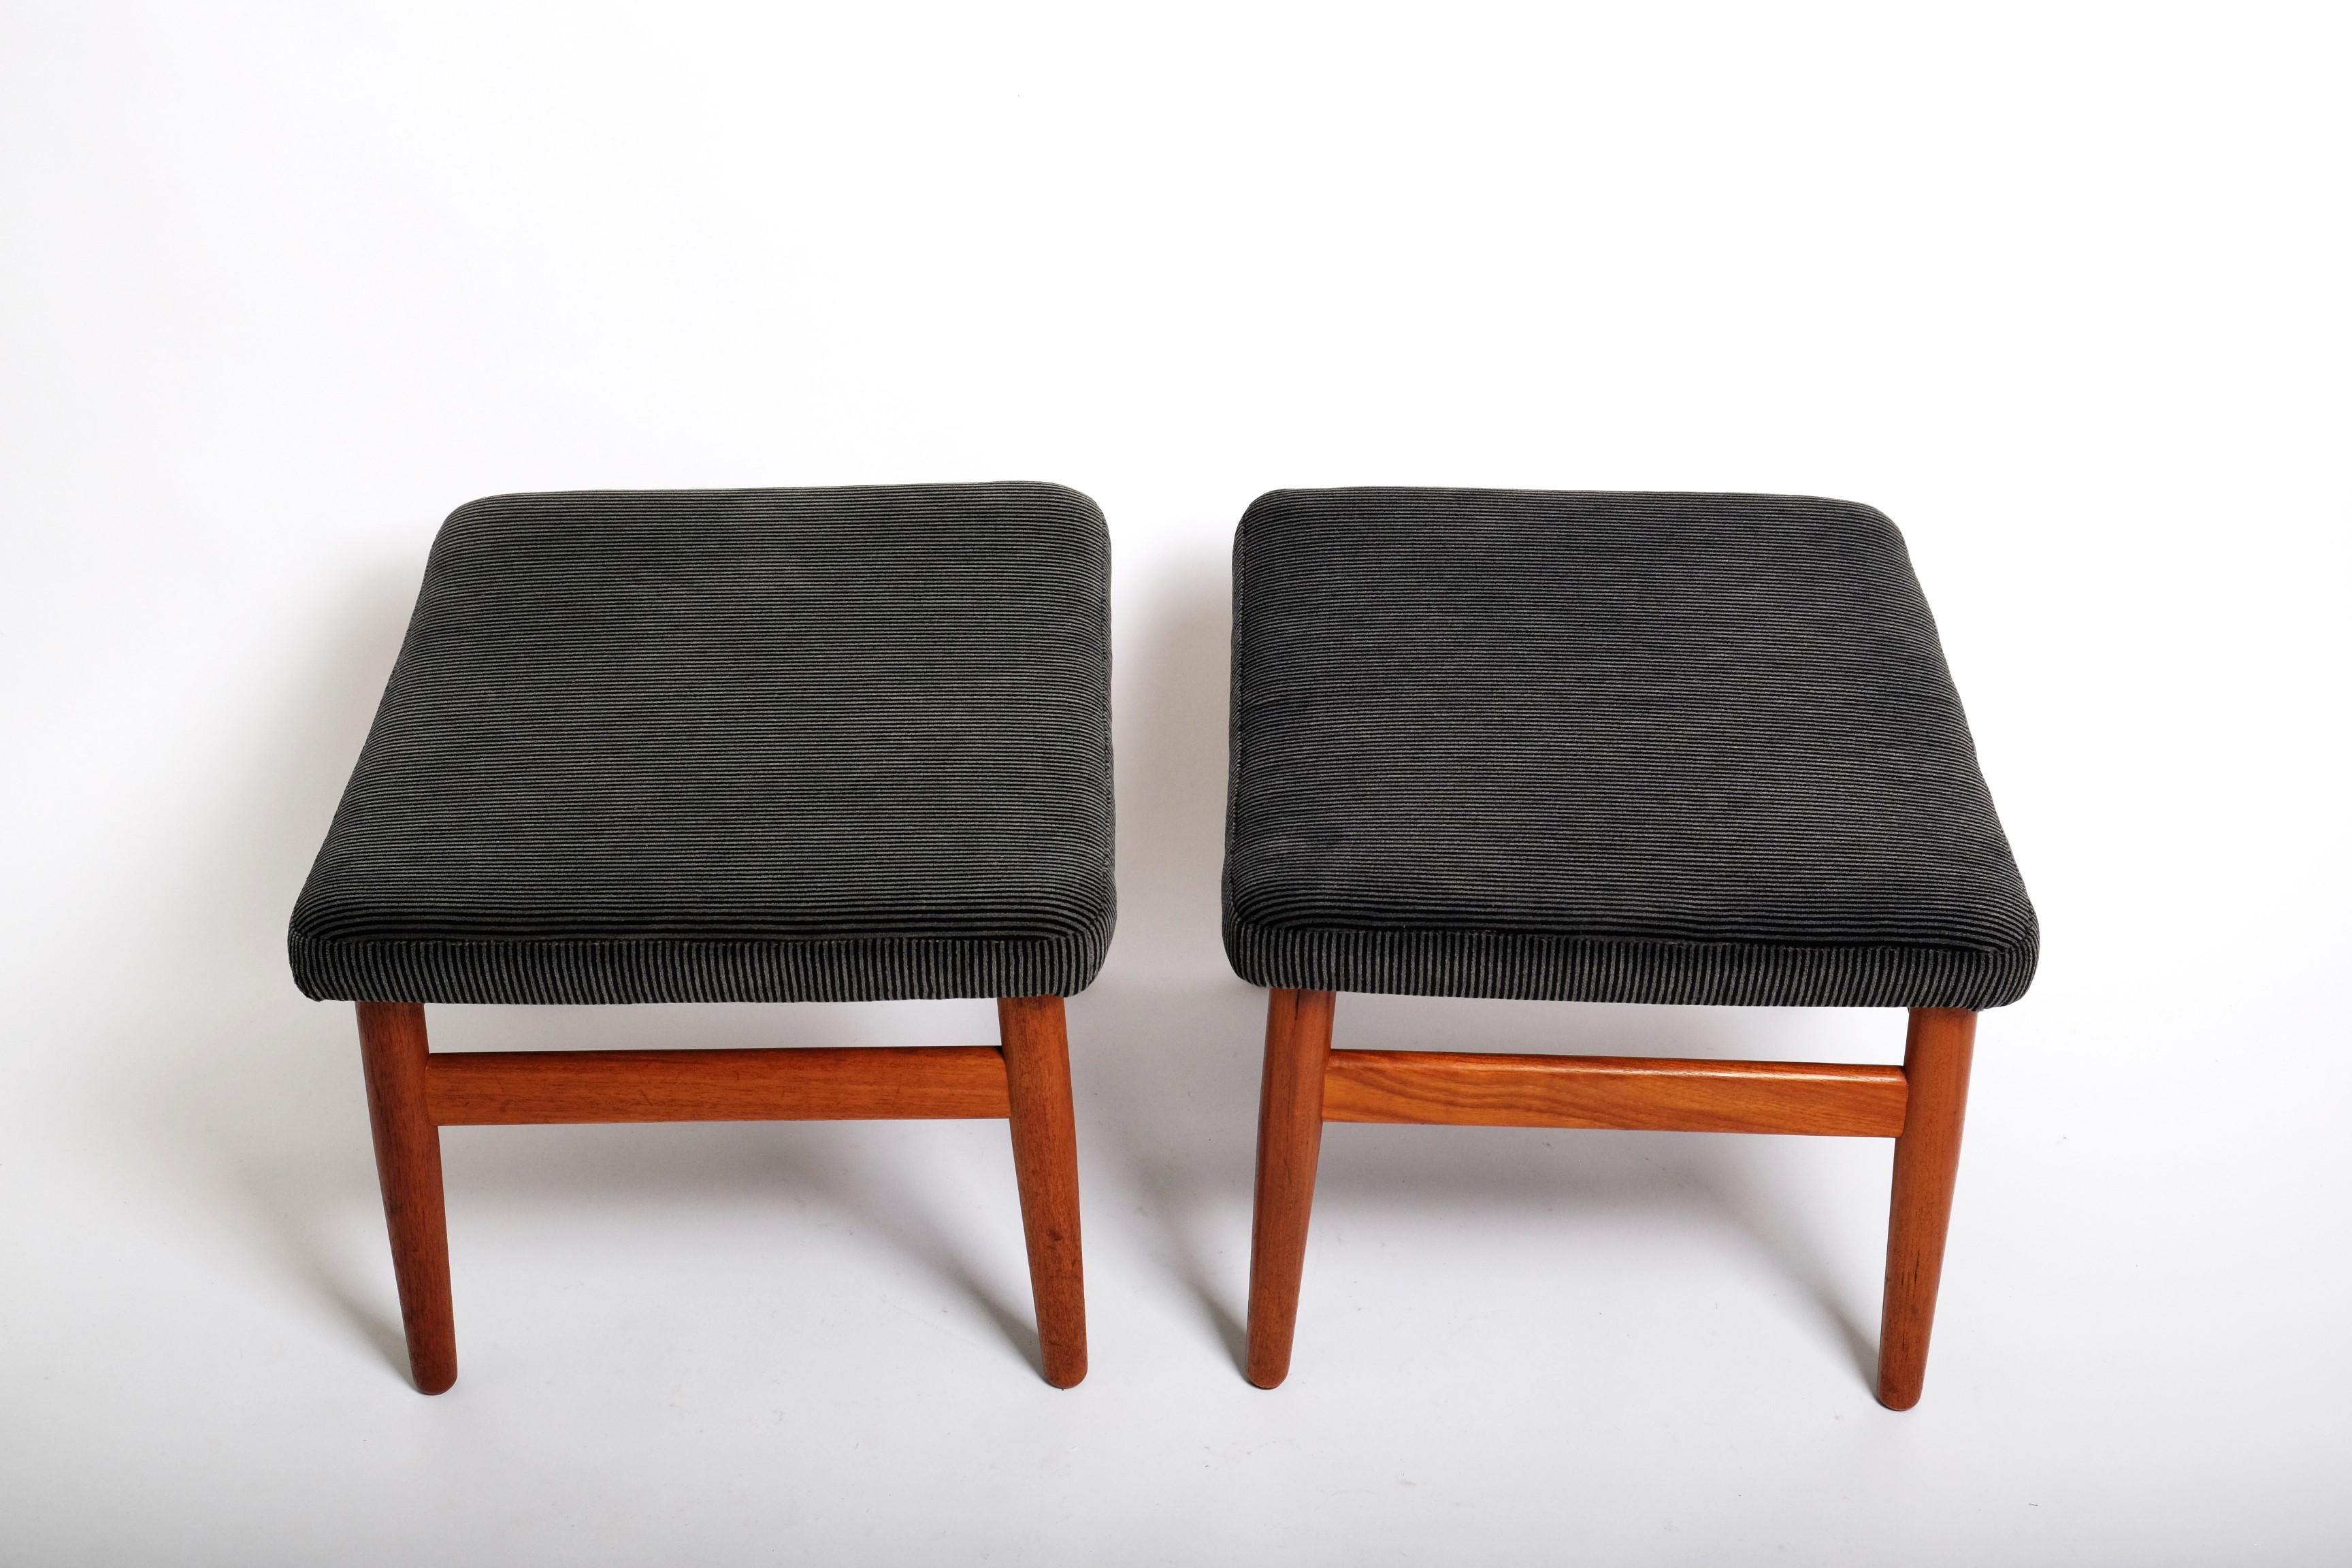 Upholstery Two Mid-Century Stools by Arne Vodder FD164 Ottomans France & Son, Denmark 1960s For Sale